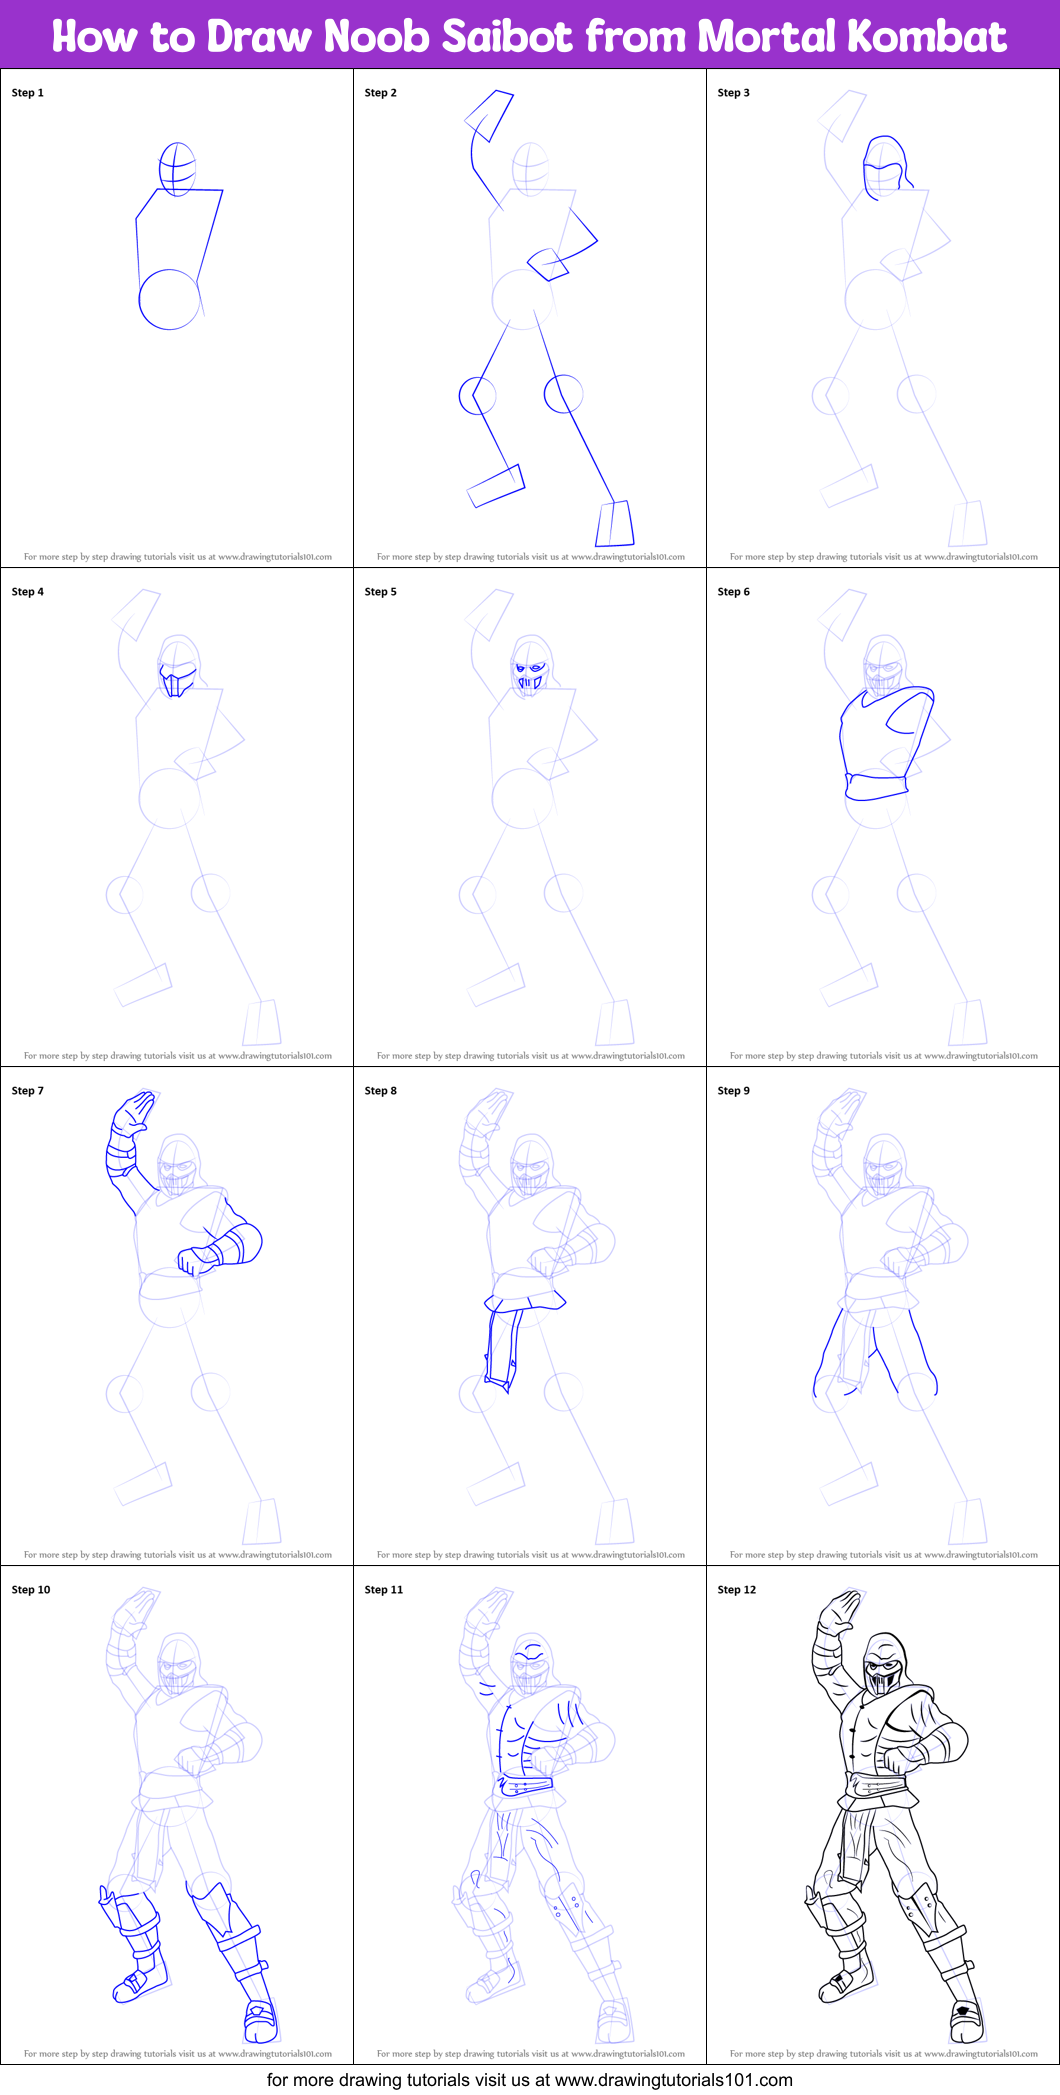 How to Draw Noob Saibot from Mortal Kombat printable step by step